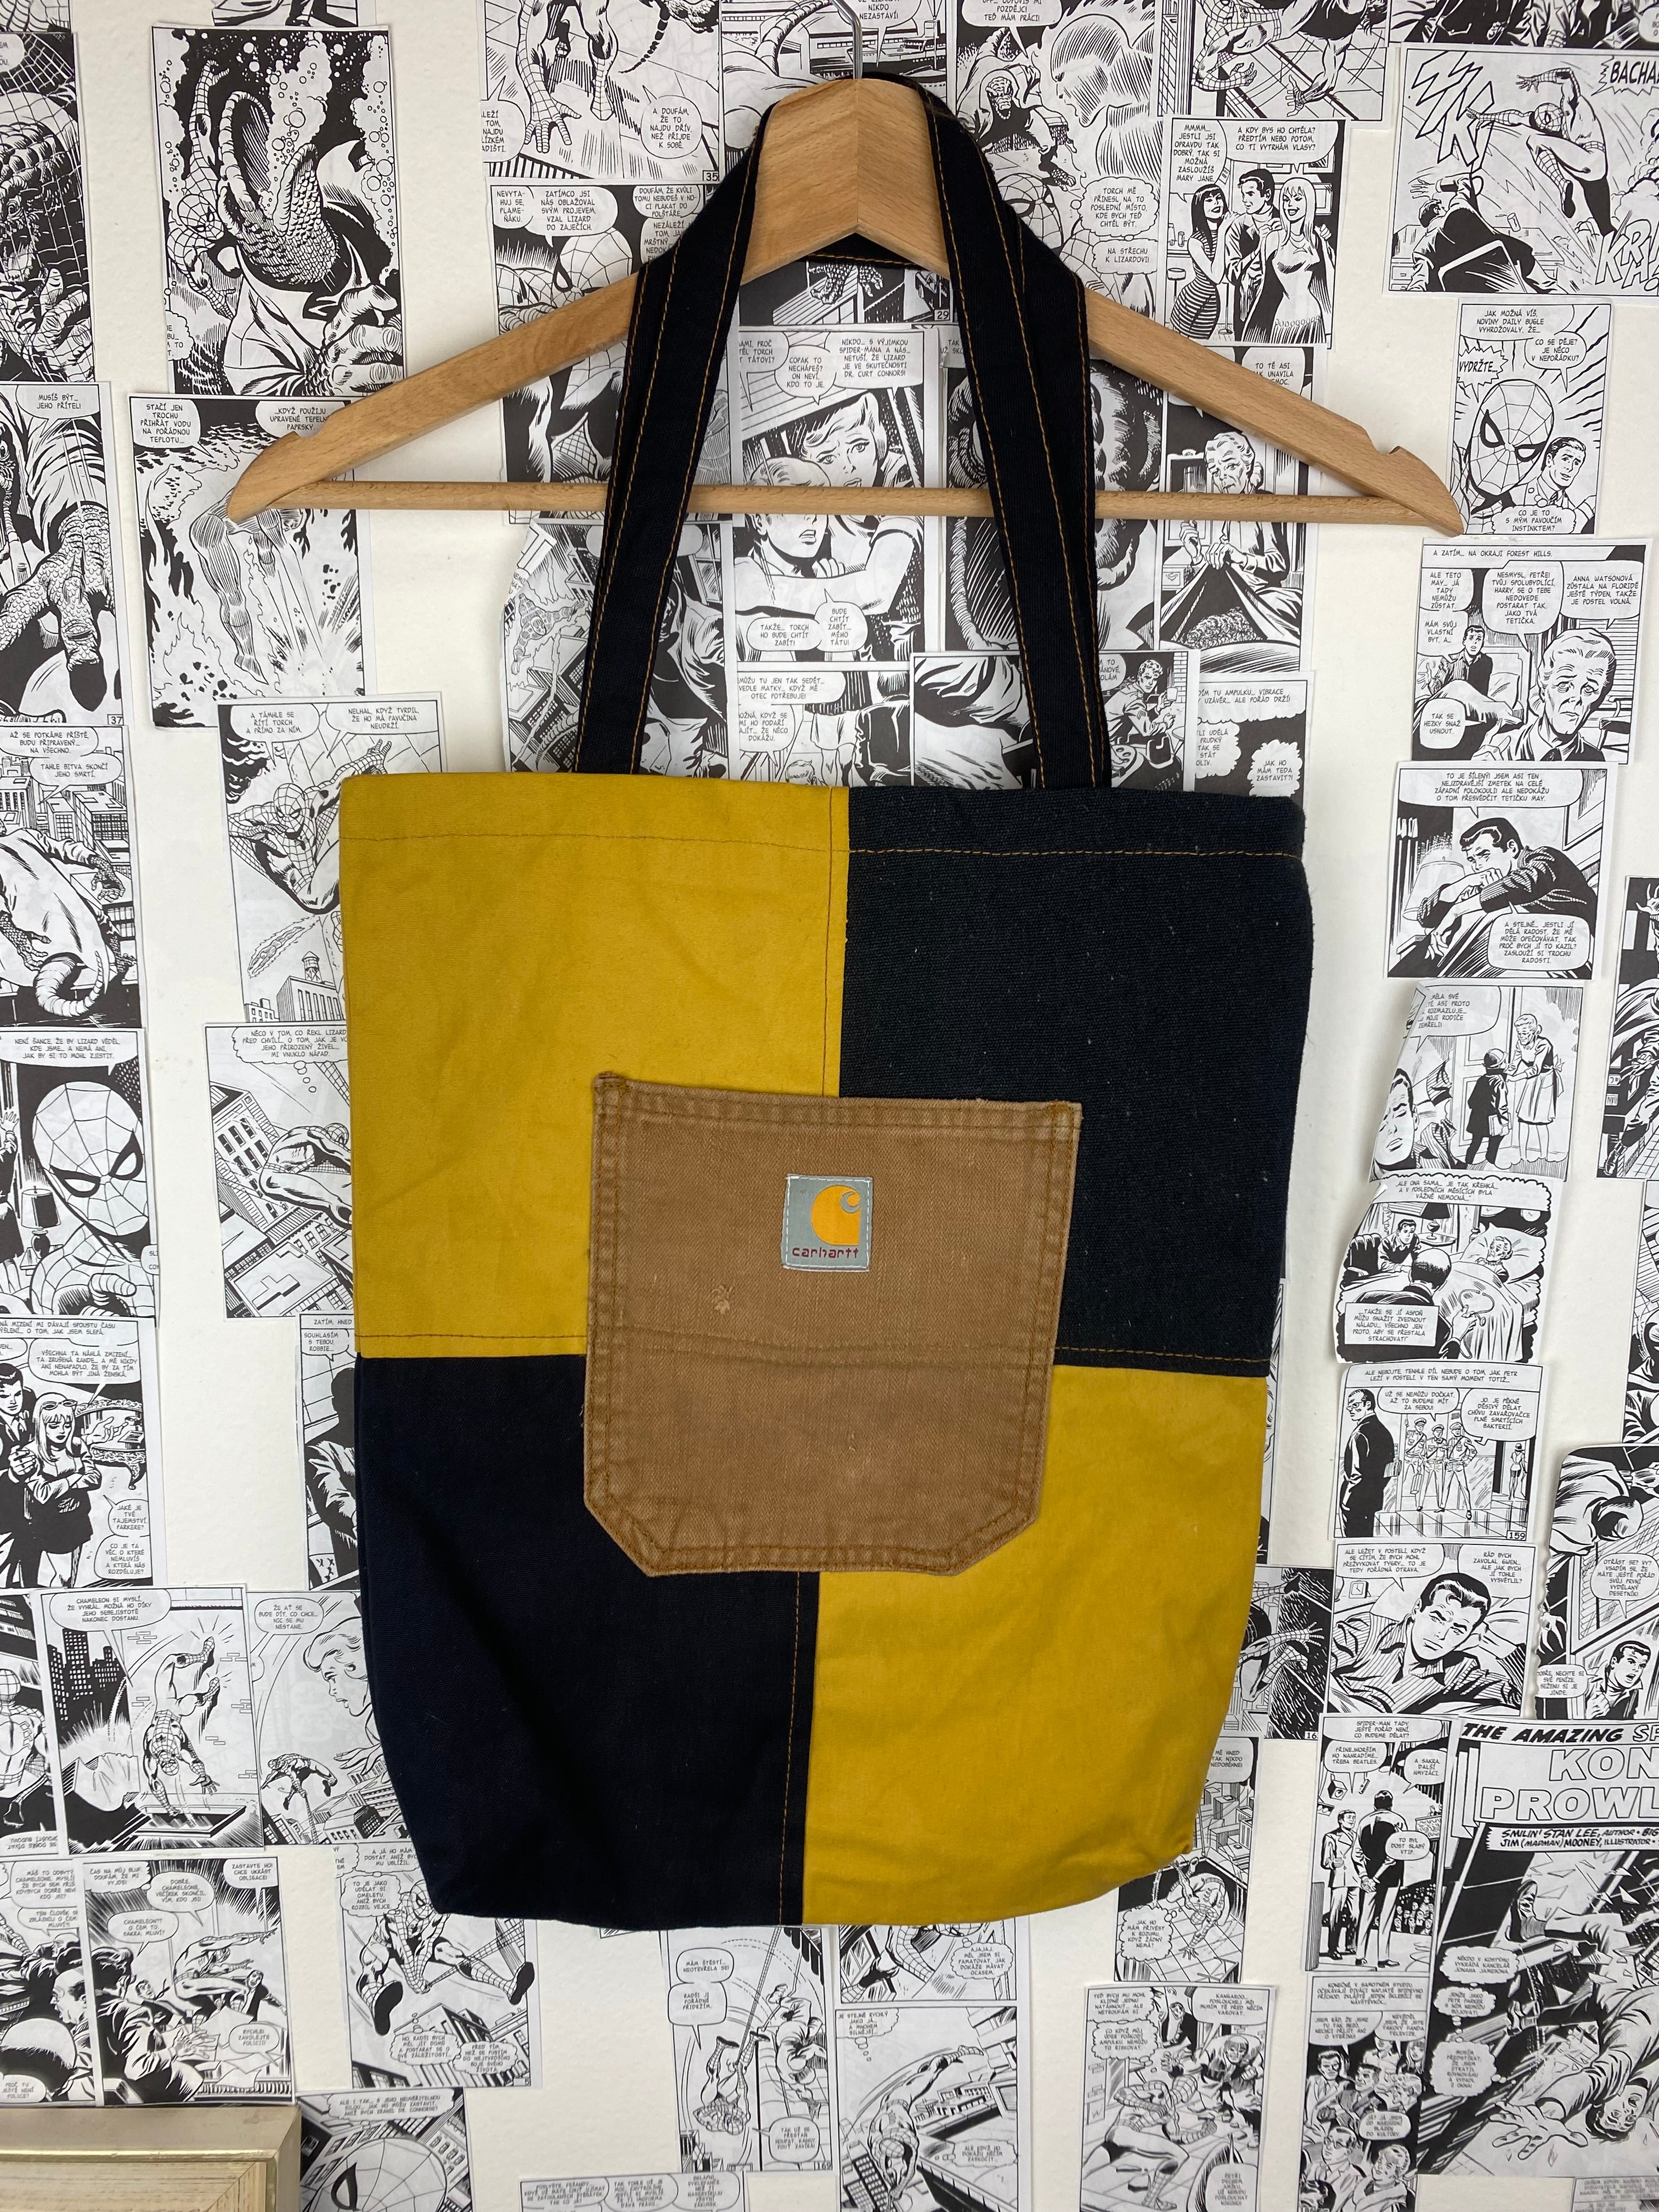 Carhartt Recycled Patchwork Tote Bag